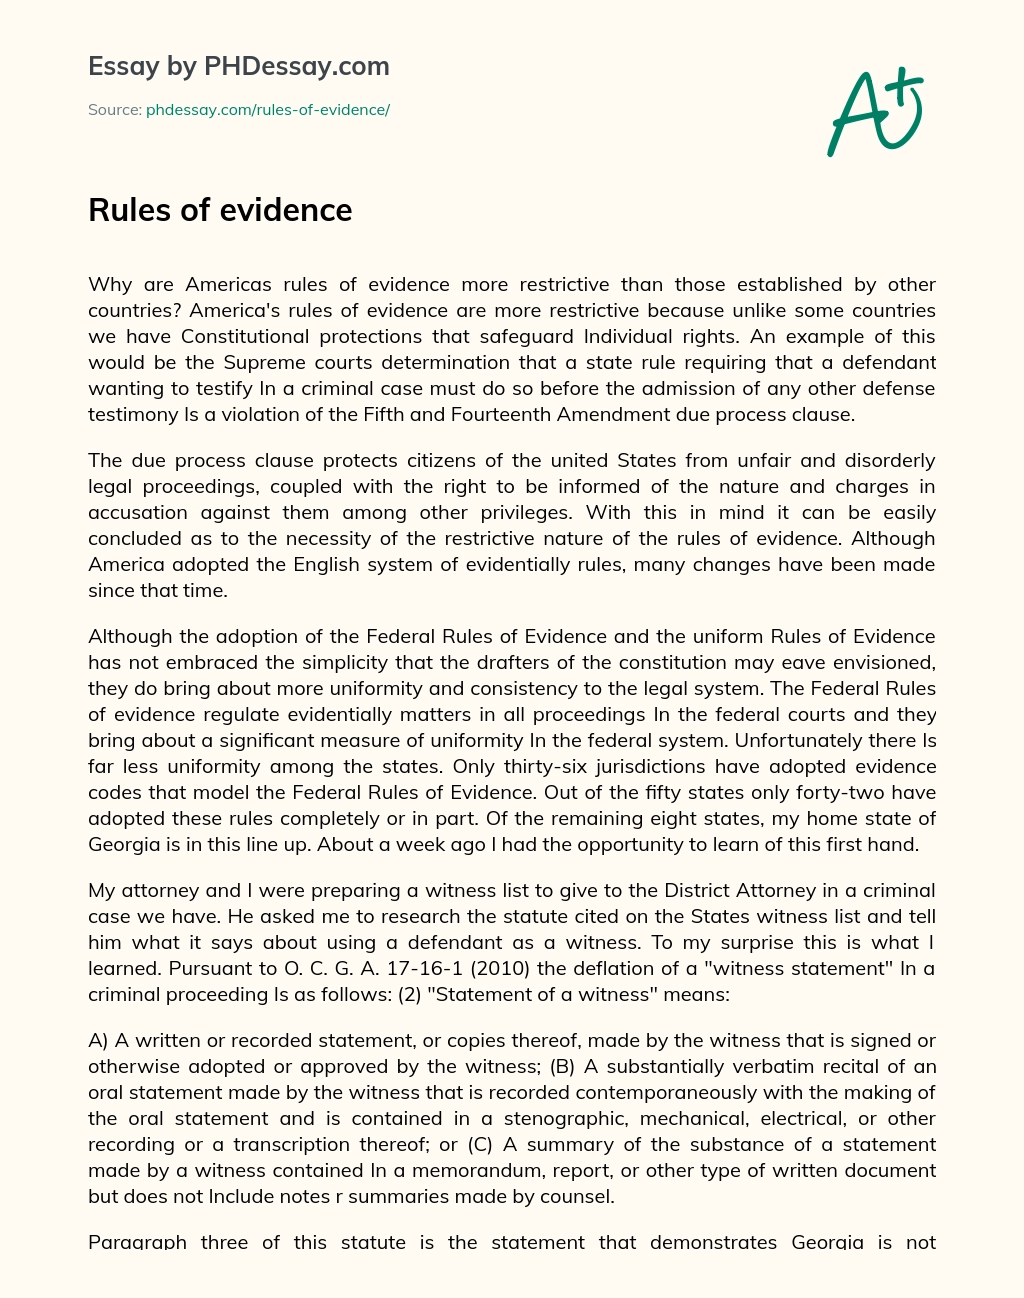 Rules of evidence essay